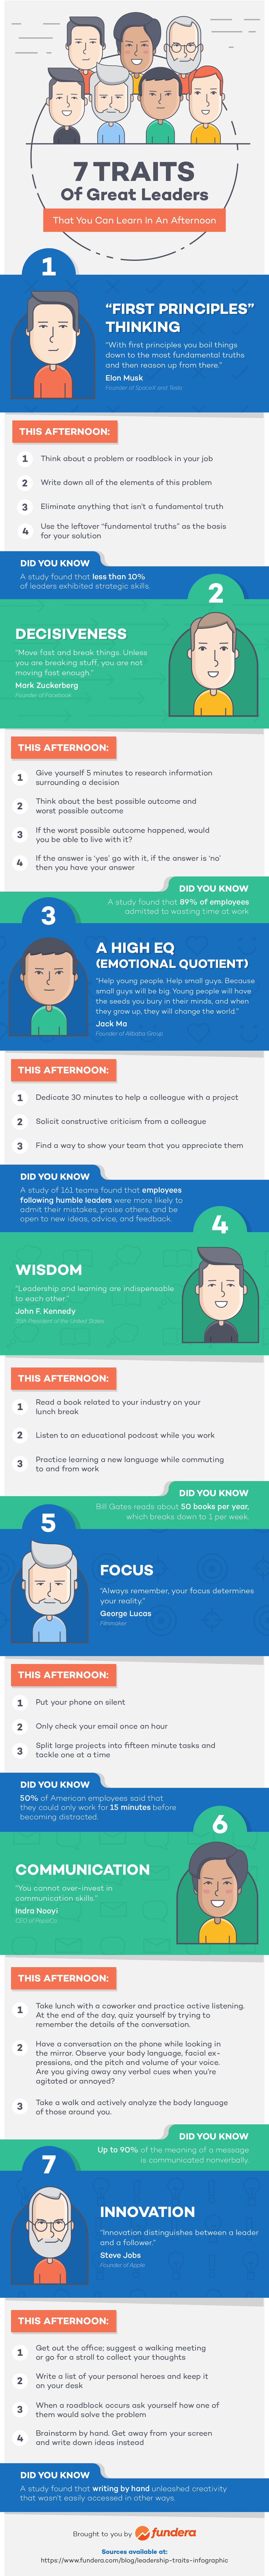 7 Leadership Traits That You Can Learn In An Afternoon - #Infographic